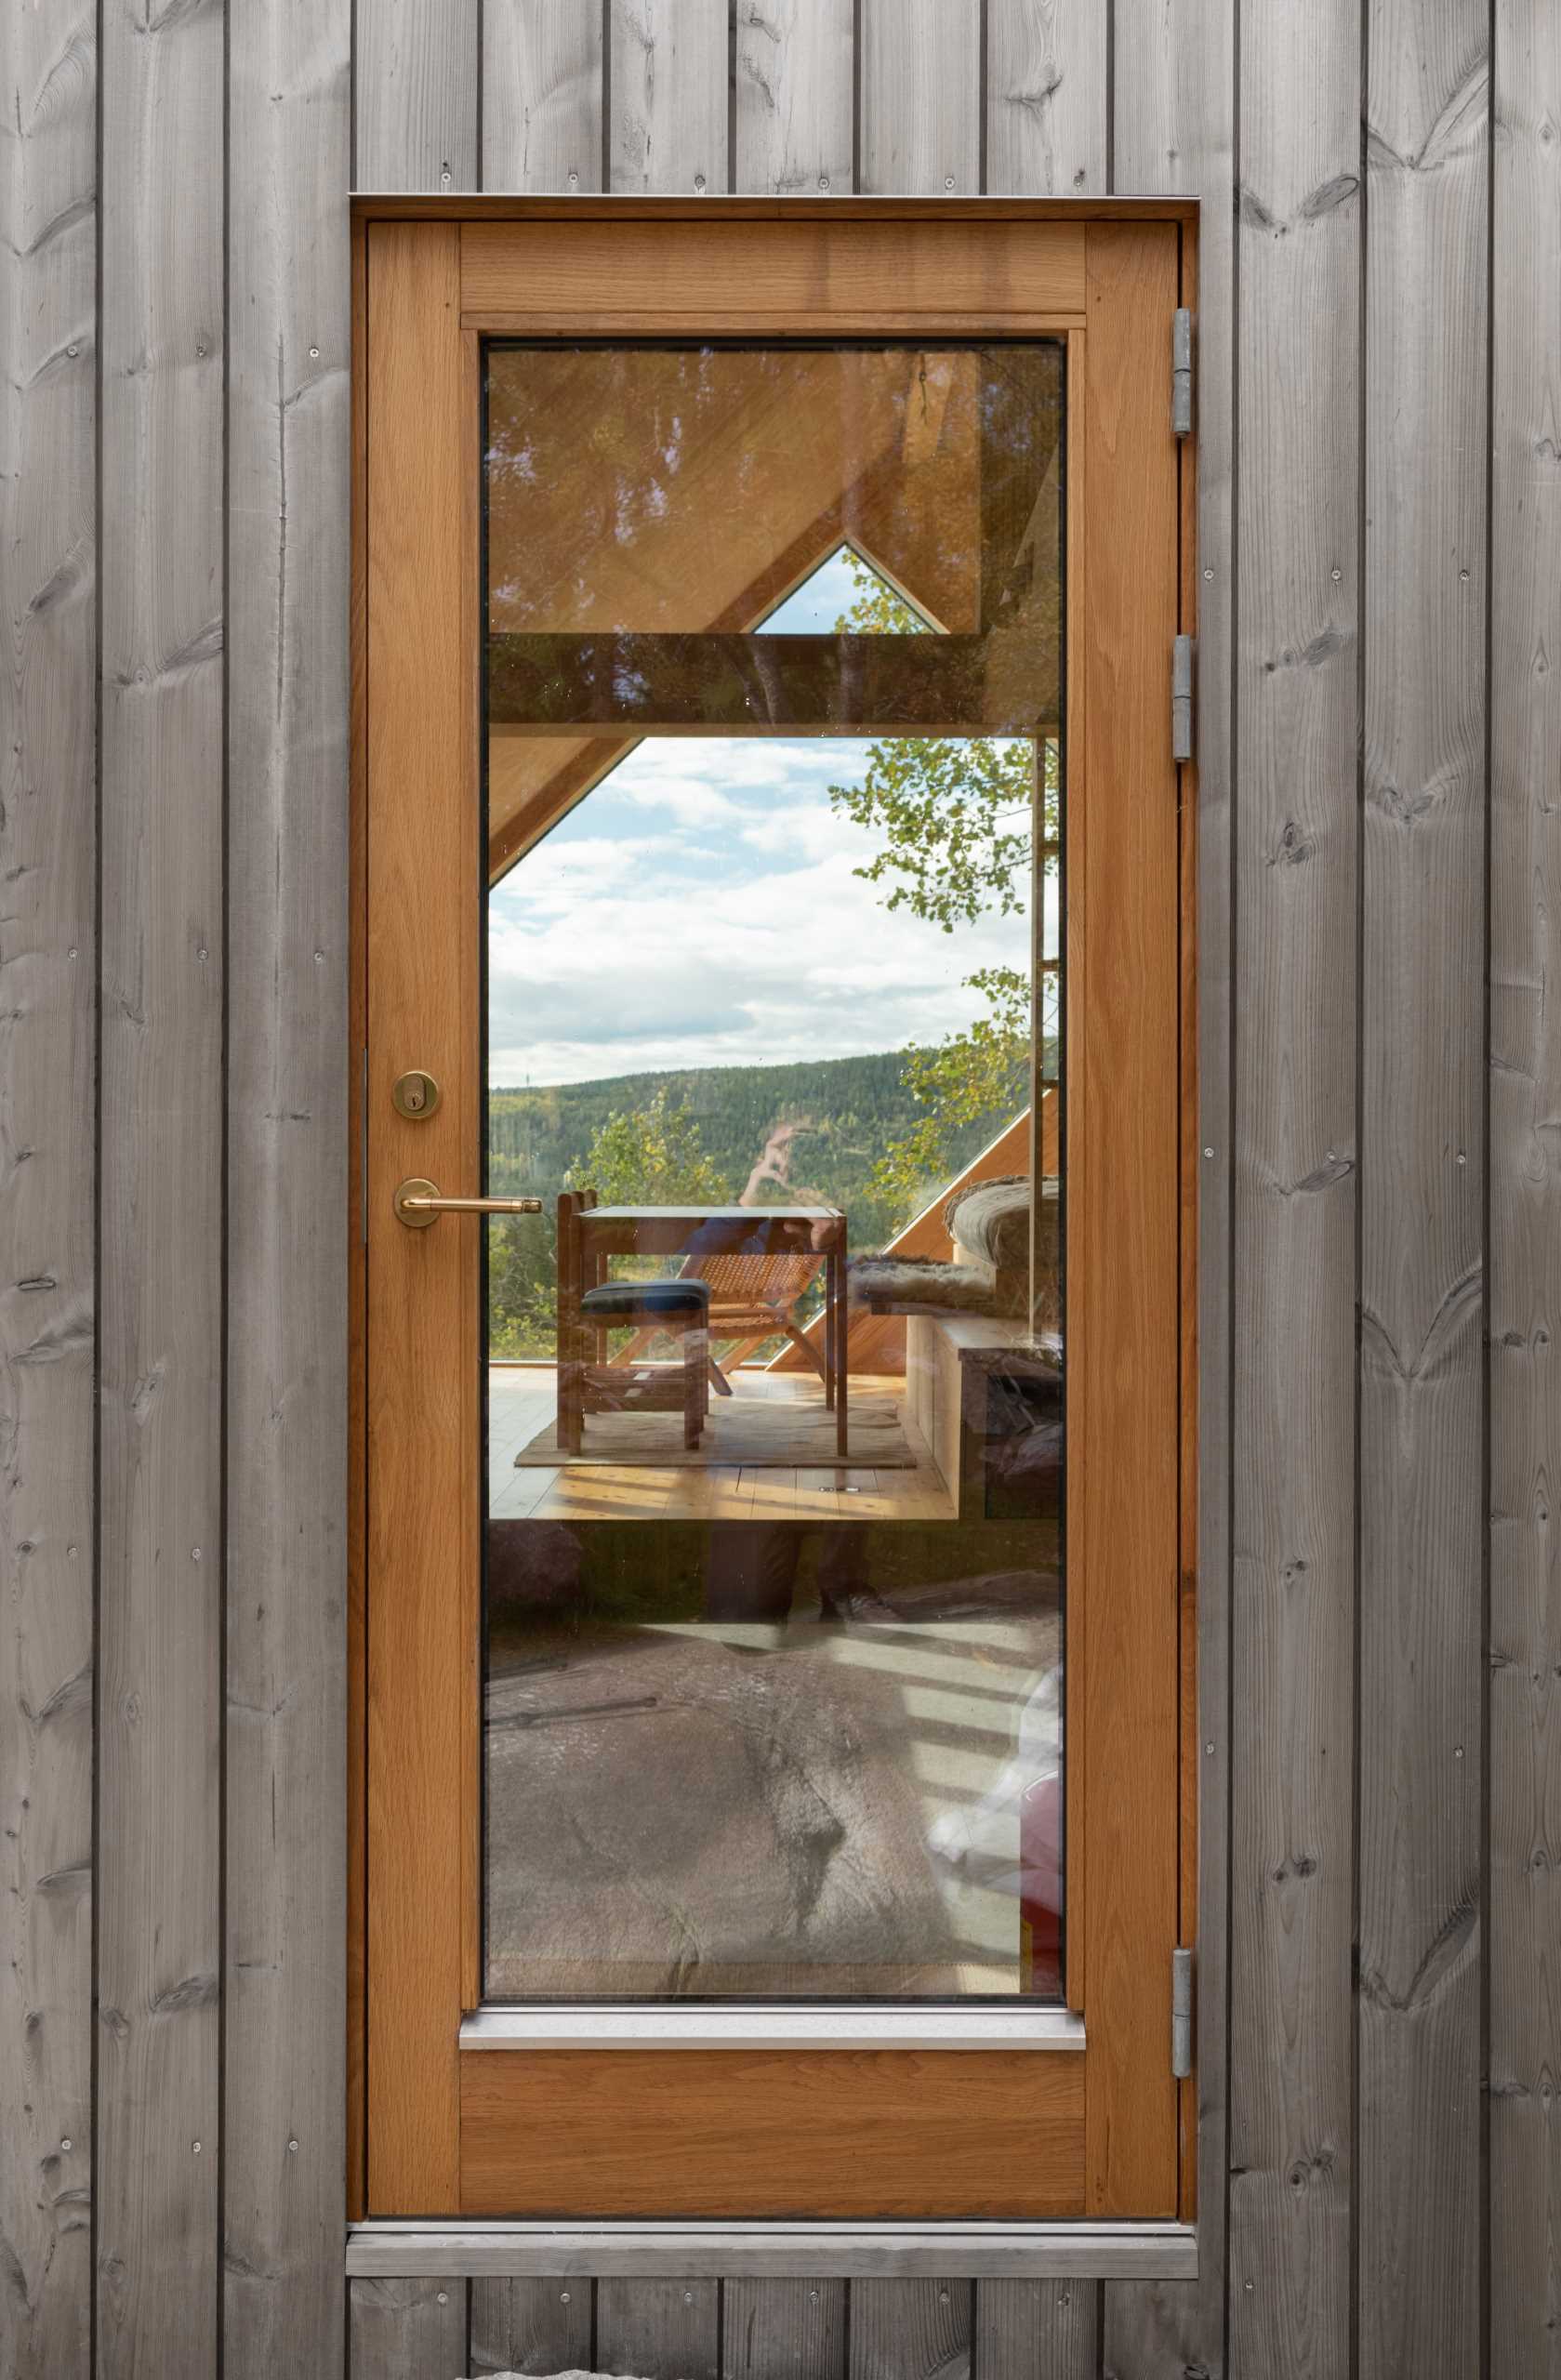 The wood-framed gl، door of a contemporary cabin.